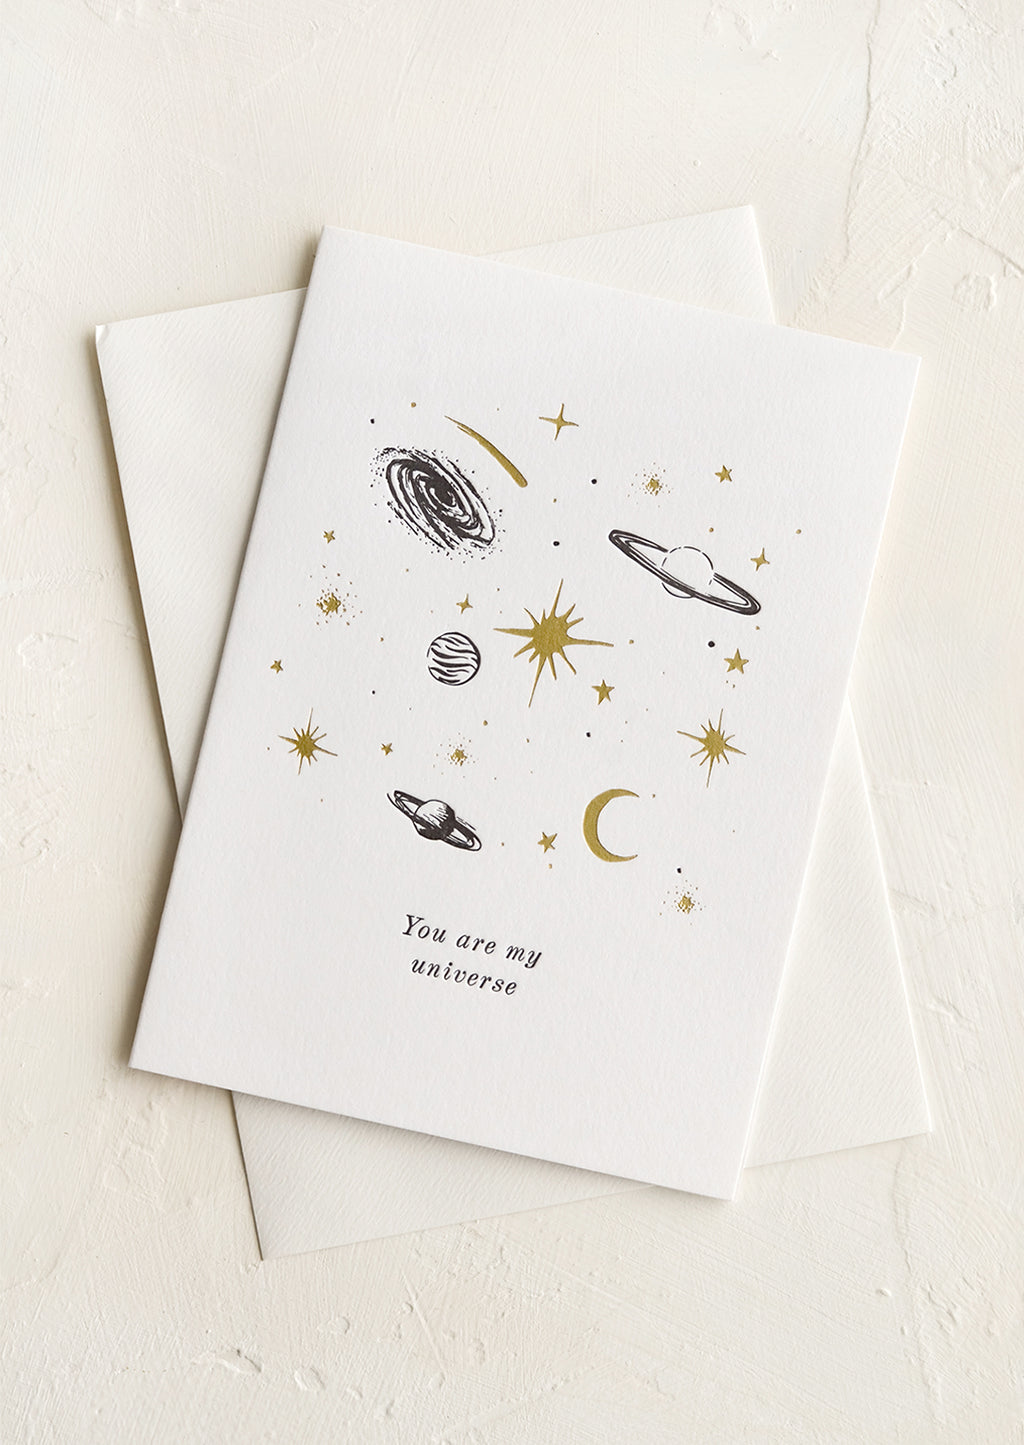 1: A greeting card with black and gold planets and text reading "You are my universe".